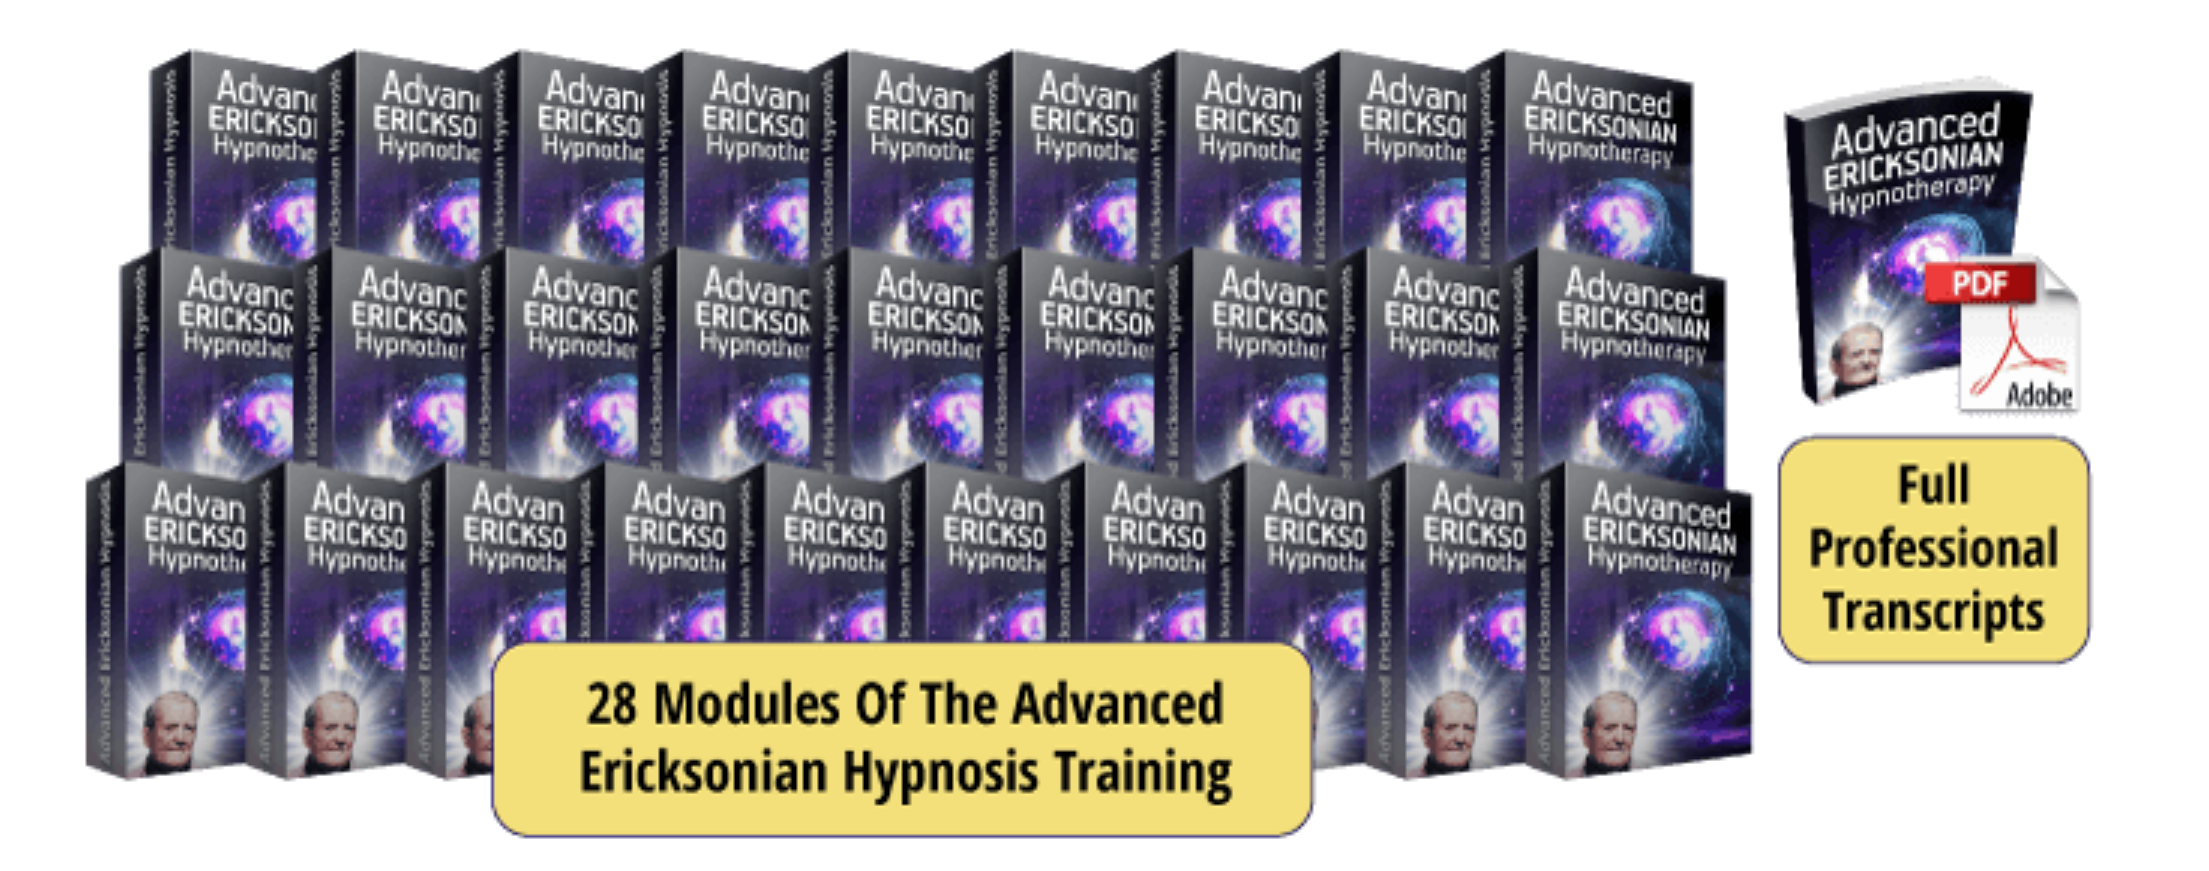  What is Advanced Ericksonian Hypnosis